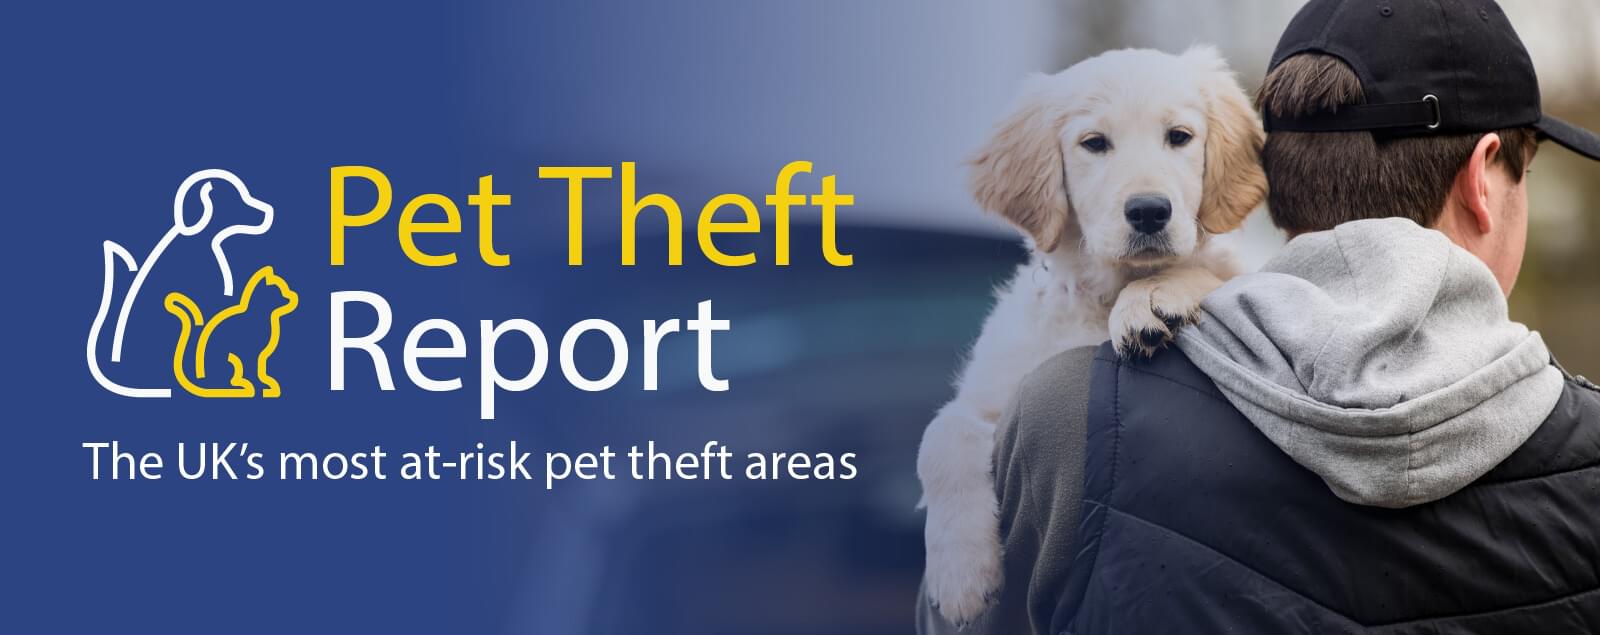 Pet Theft Report title and logo alongside a man with his back turned holding a dog over his shoulder